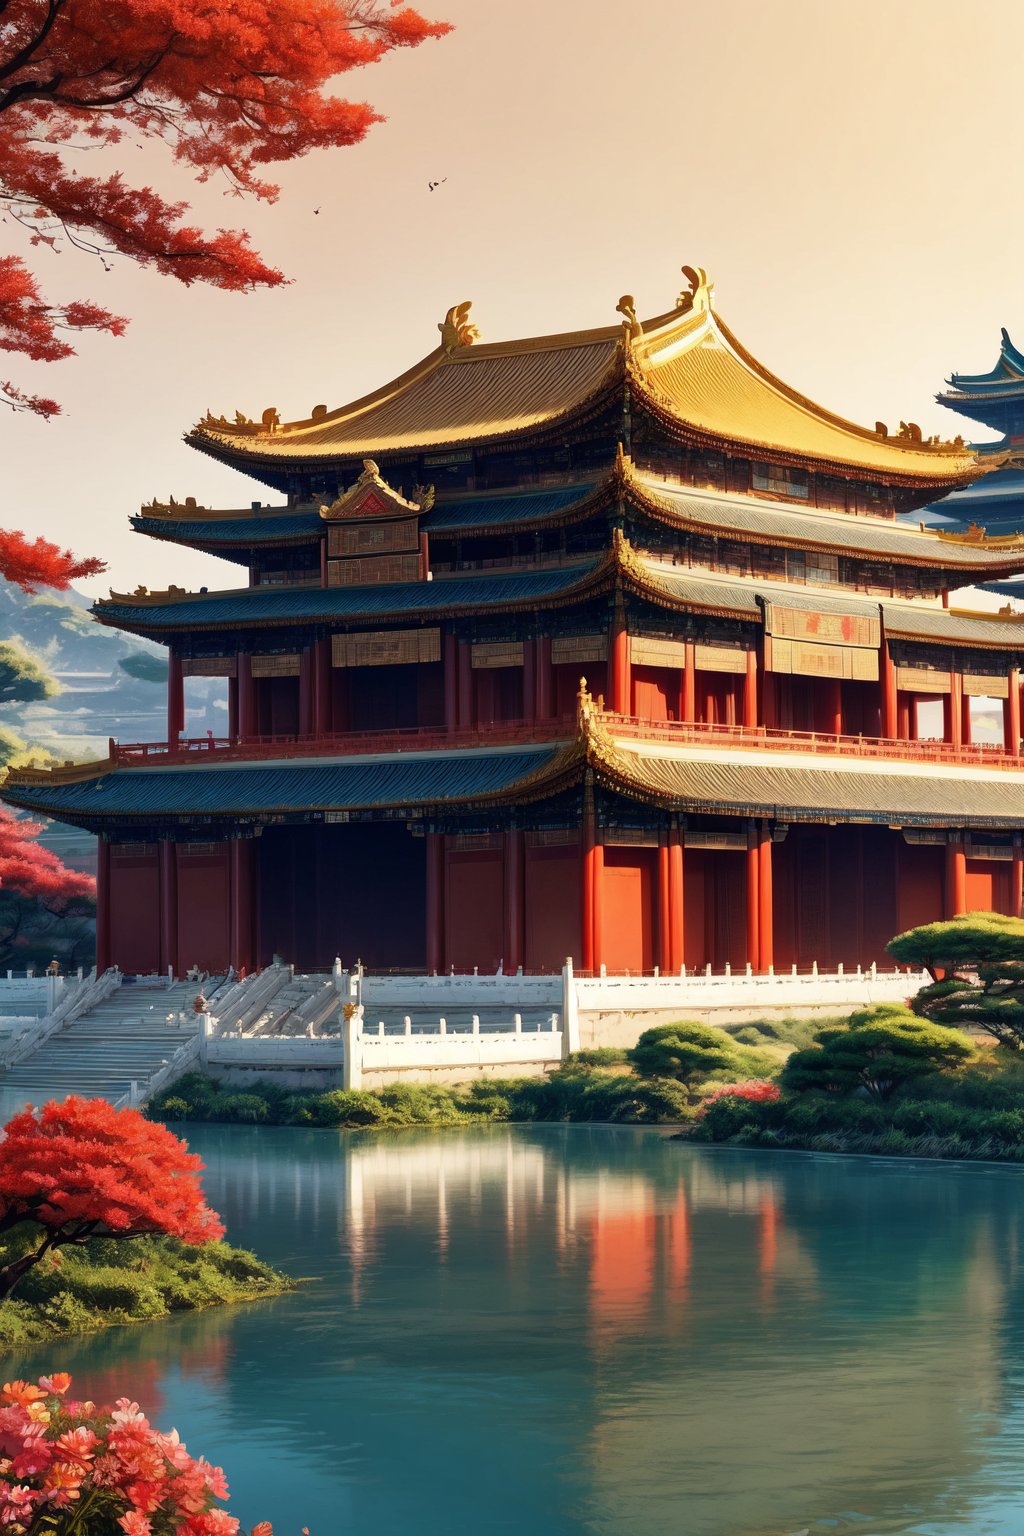 majestic, high-definition, vibrant, picturesque, 
giant Chinese imperial palace, traditional architecture, golden and red tones, 
beautiful scenery, bird songs, fragrant flowers, cloudless sky, 
cultural, historical, serene, visually striking, 